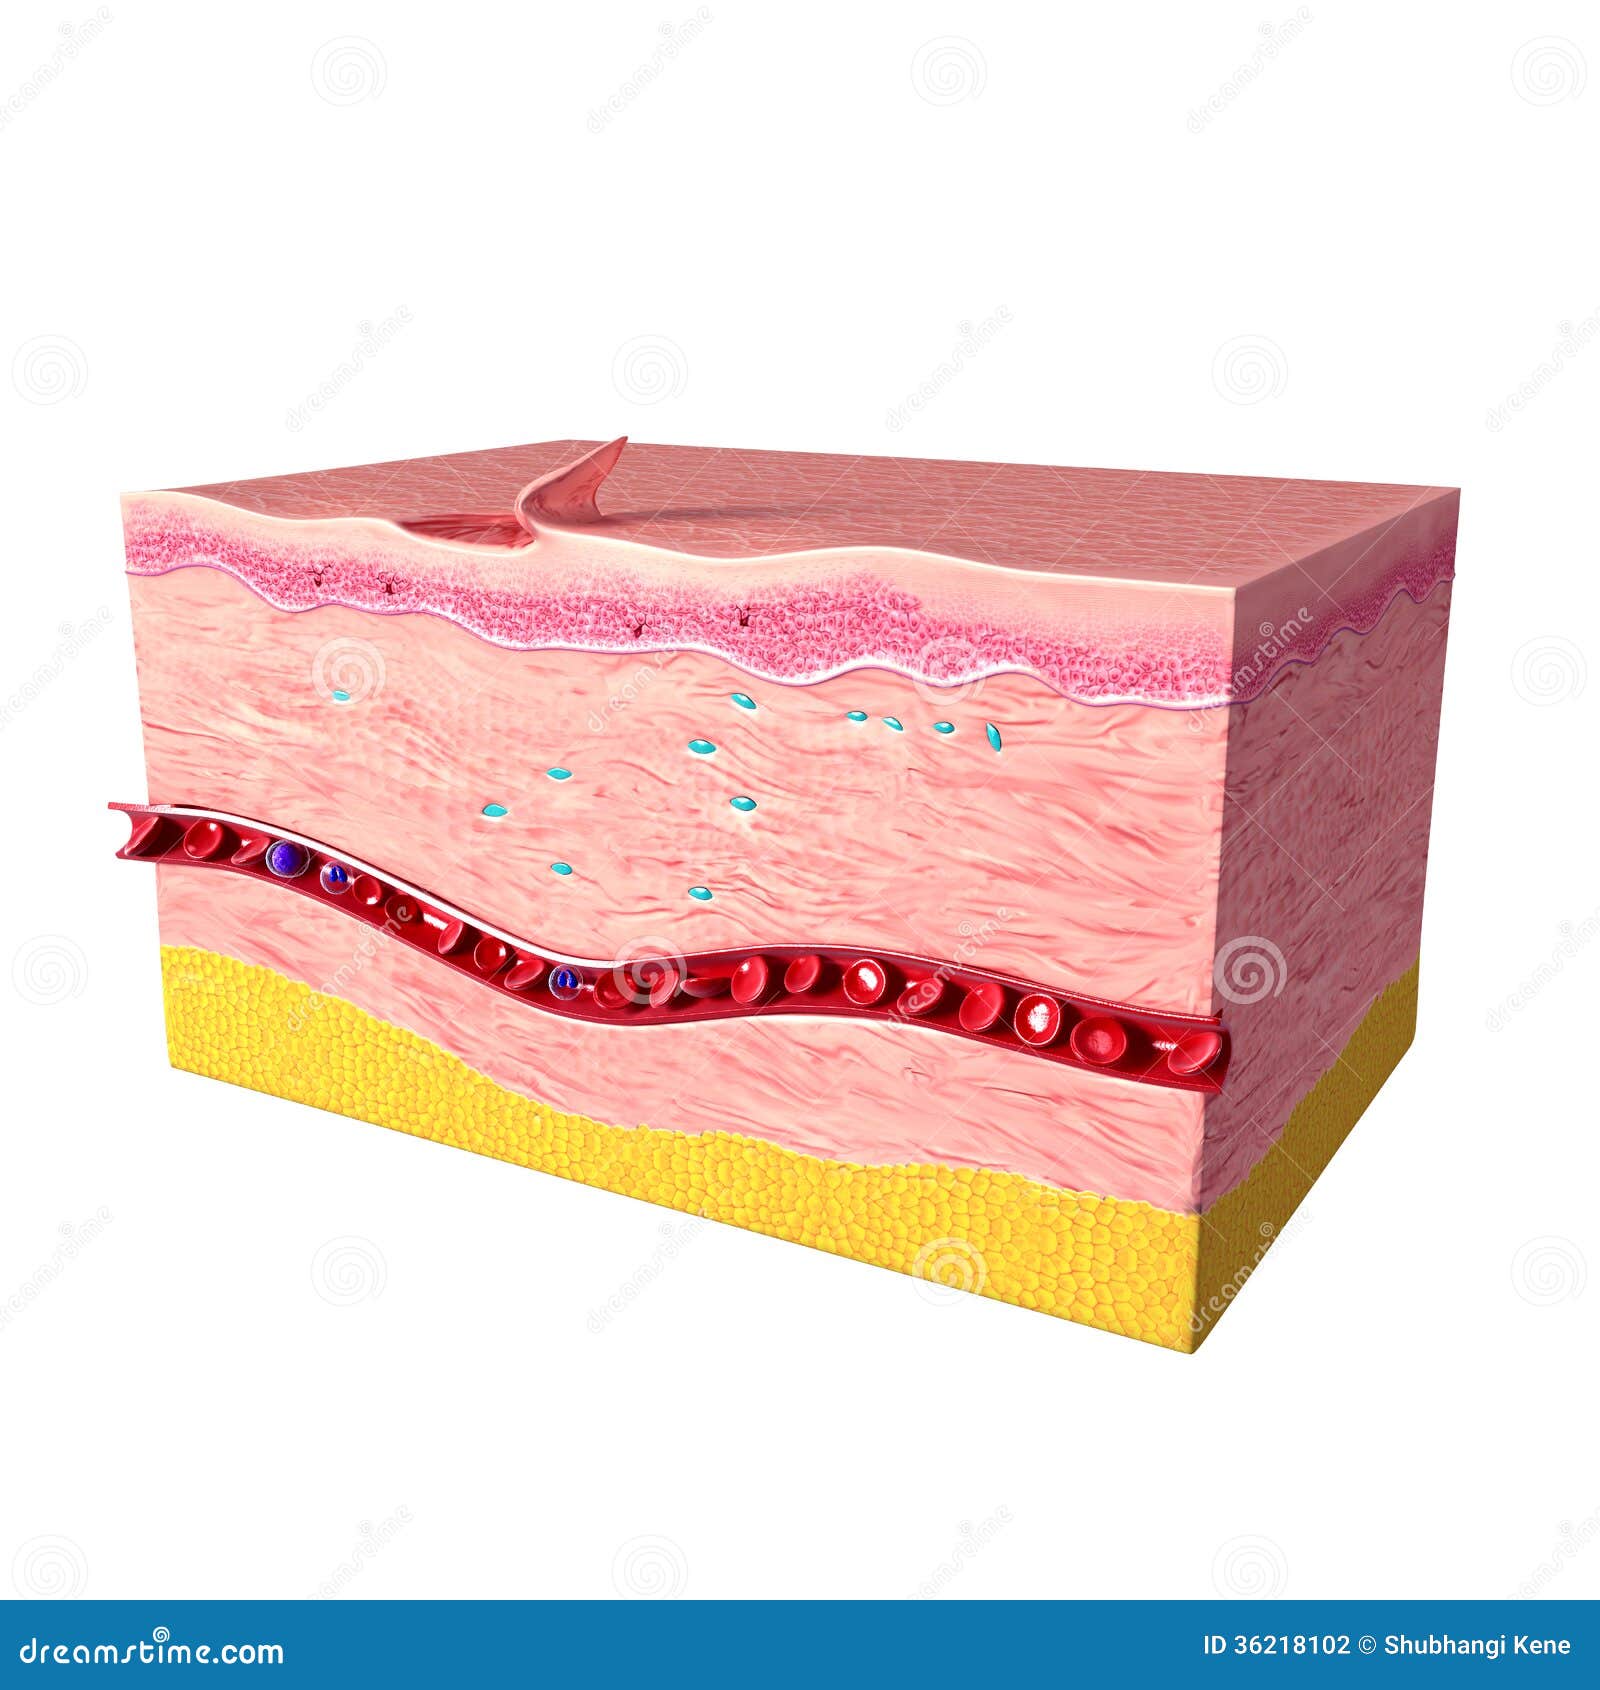 clipart of human tissue - photo #1